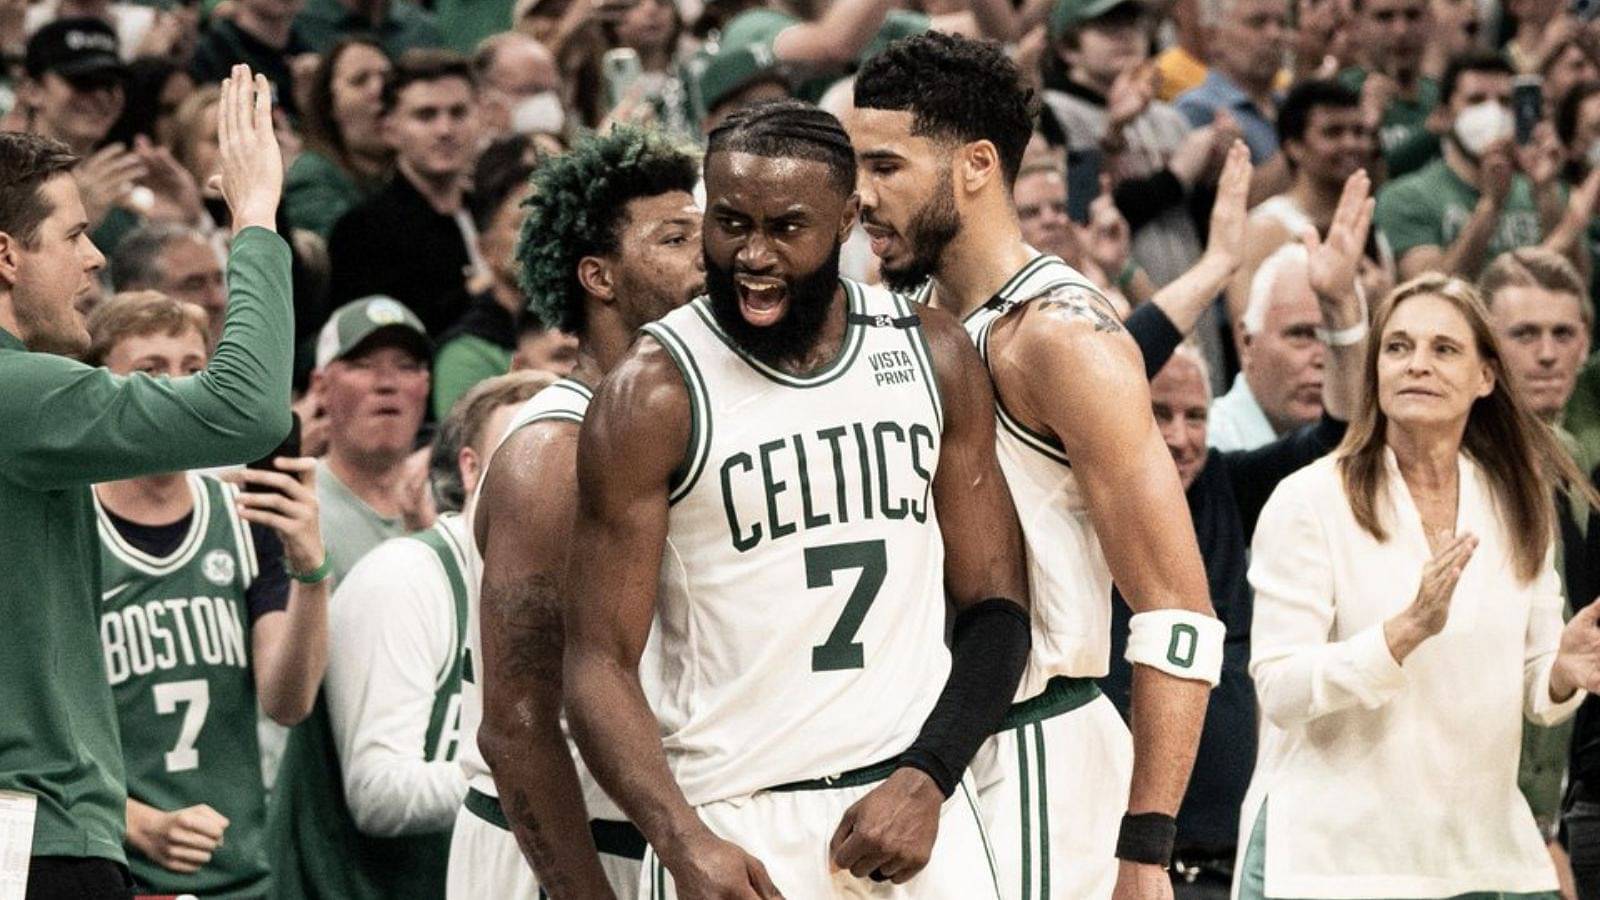 "Jaylen Brown should be FMVP and he is a little better player than Jayson Tatum”: NBA Reddit, Twitter, and analysts have JB winning Finals MVP over JT